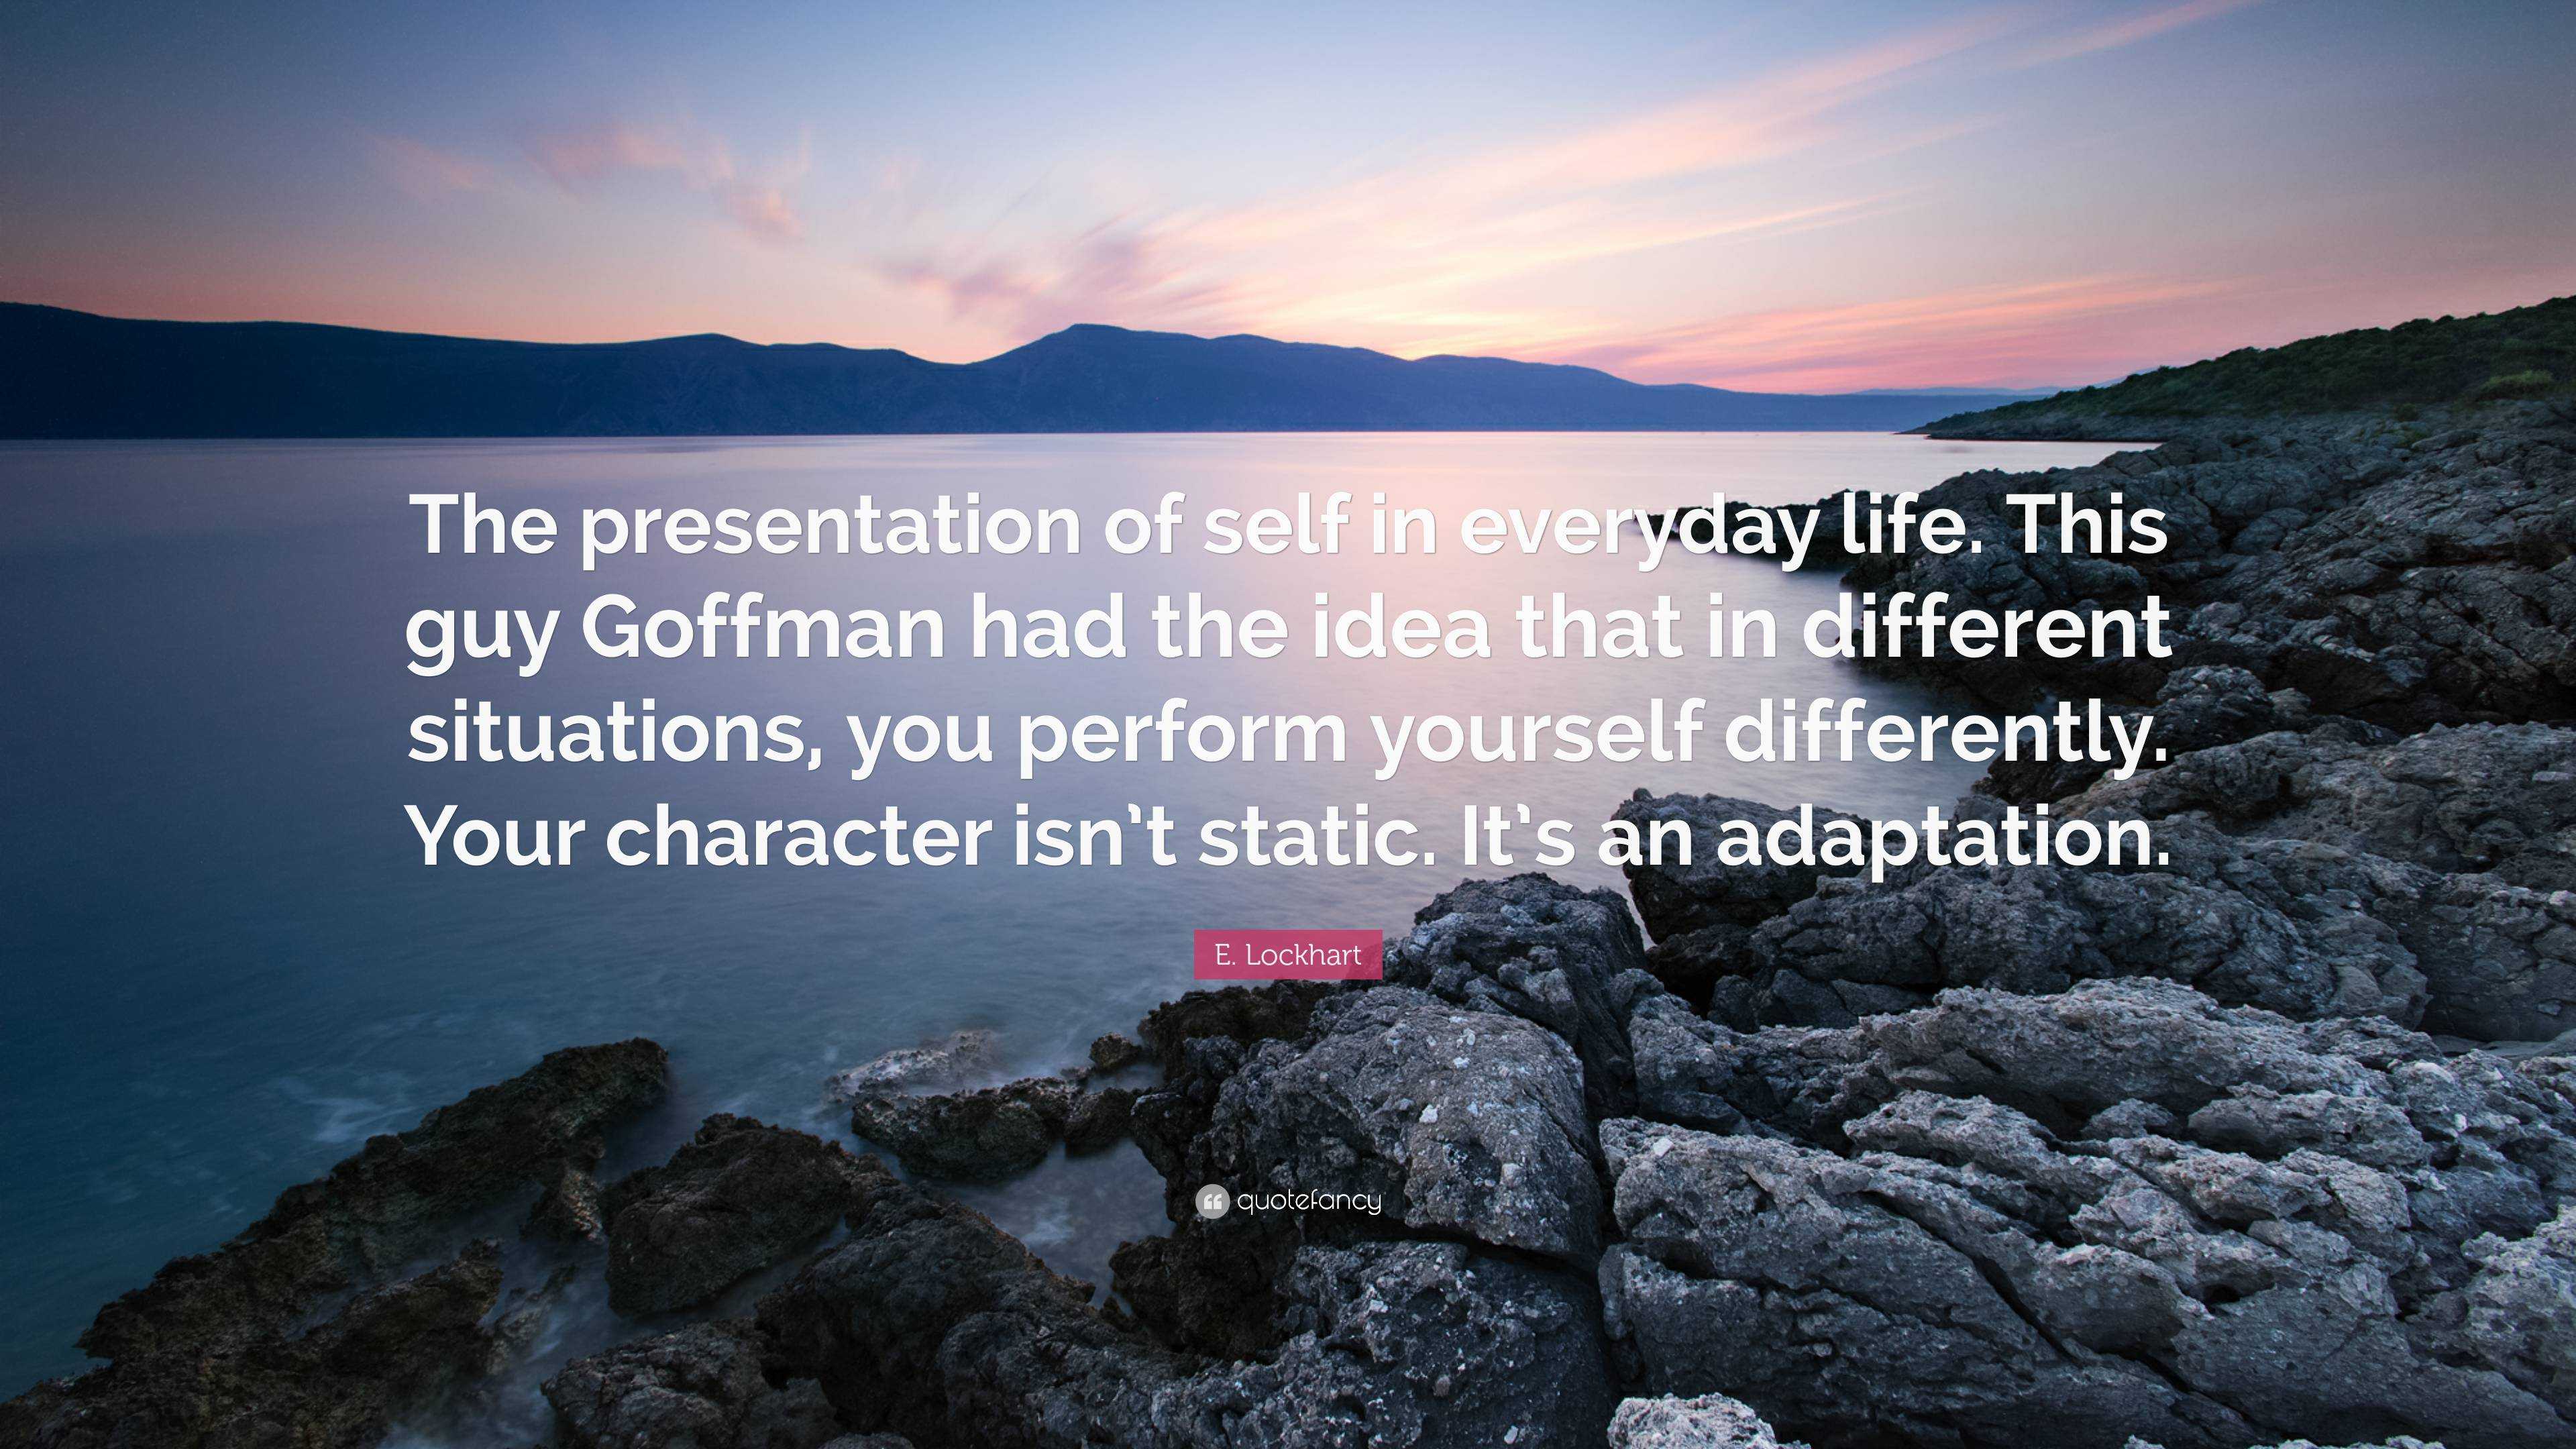 the presentation of self in everyday life quotes